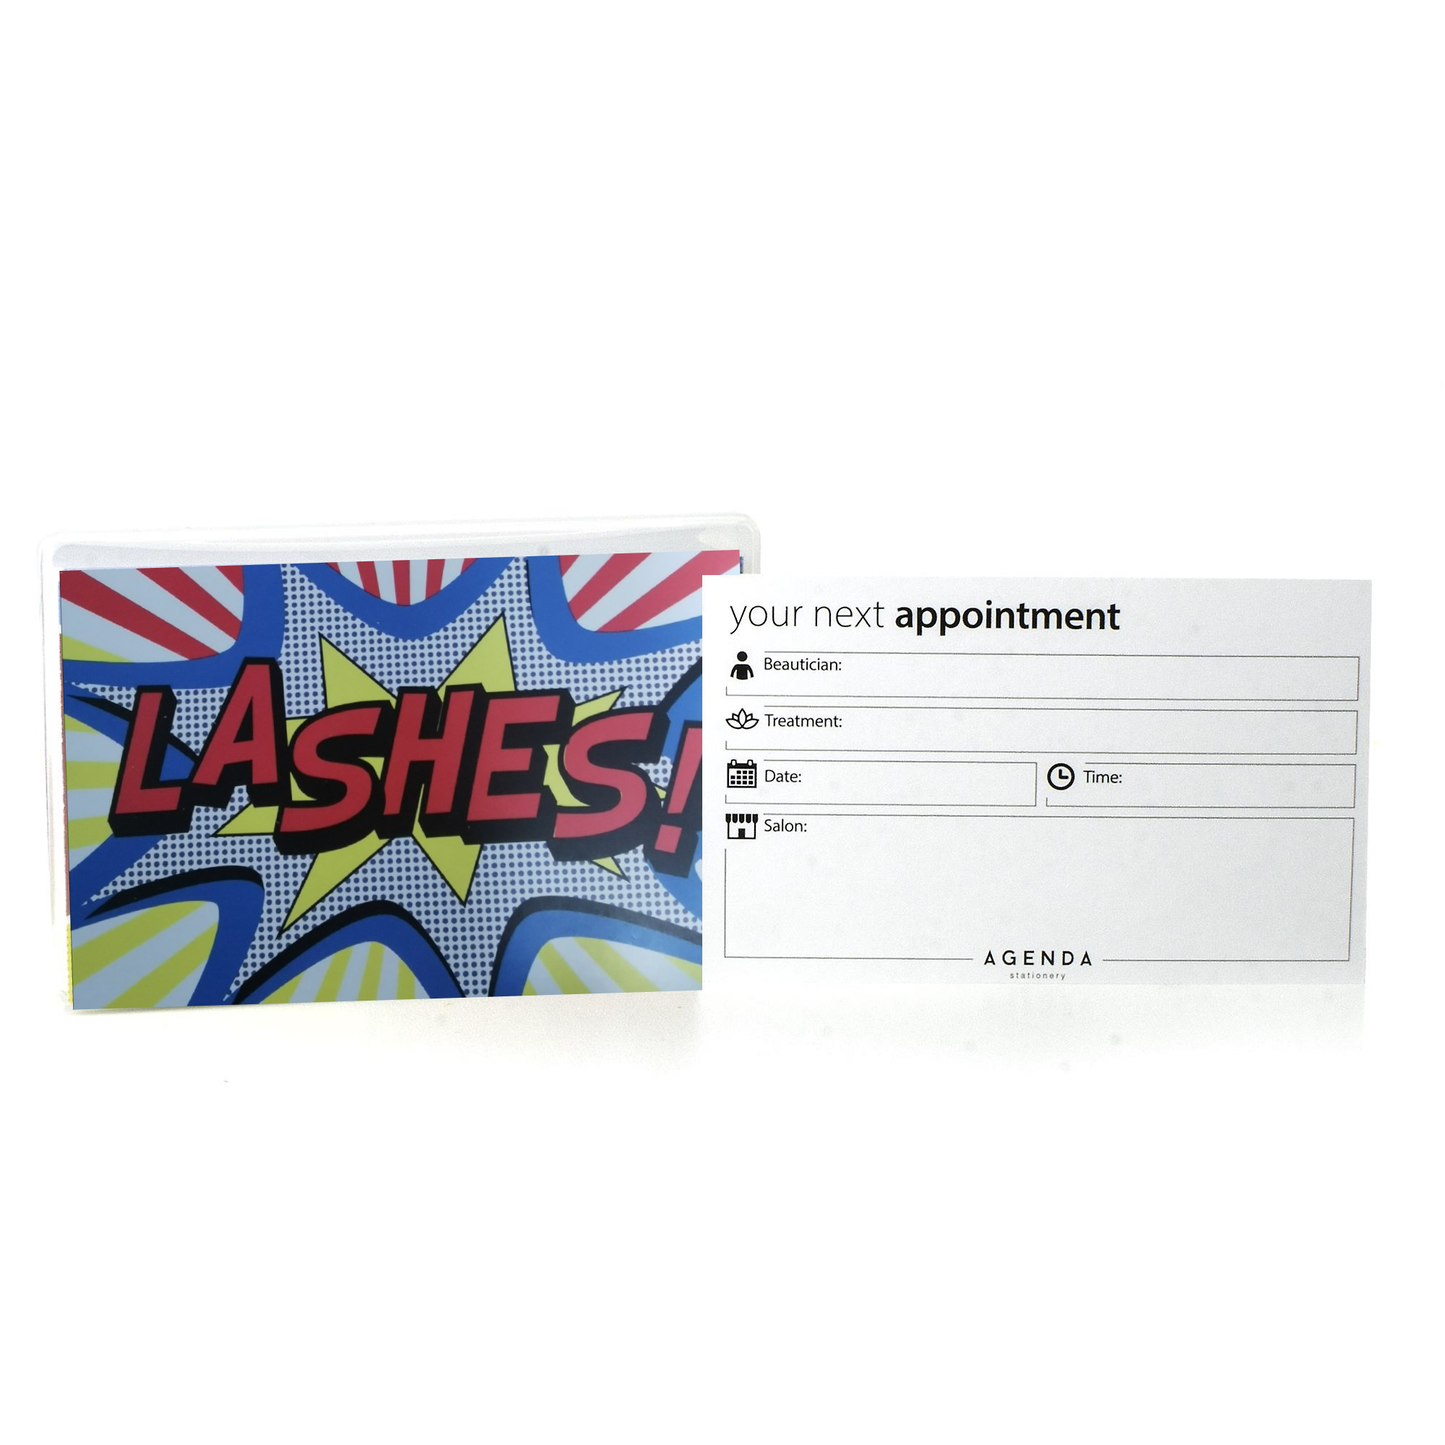 Agenda Lashes! Tech Appointment Cards 100 Pack